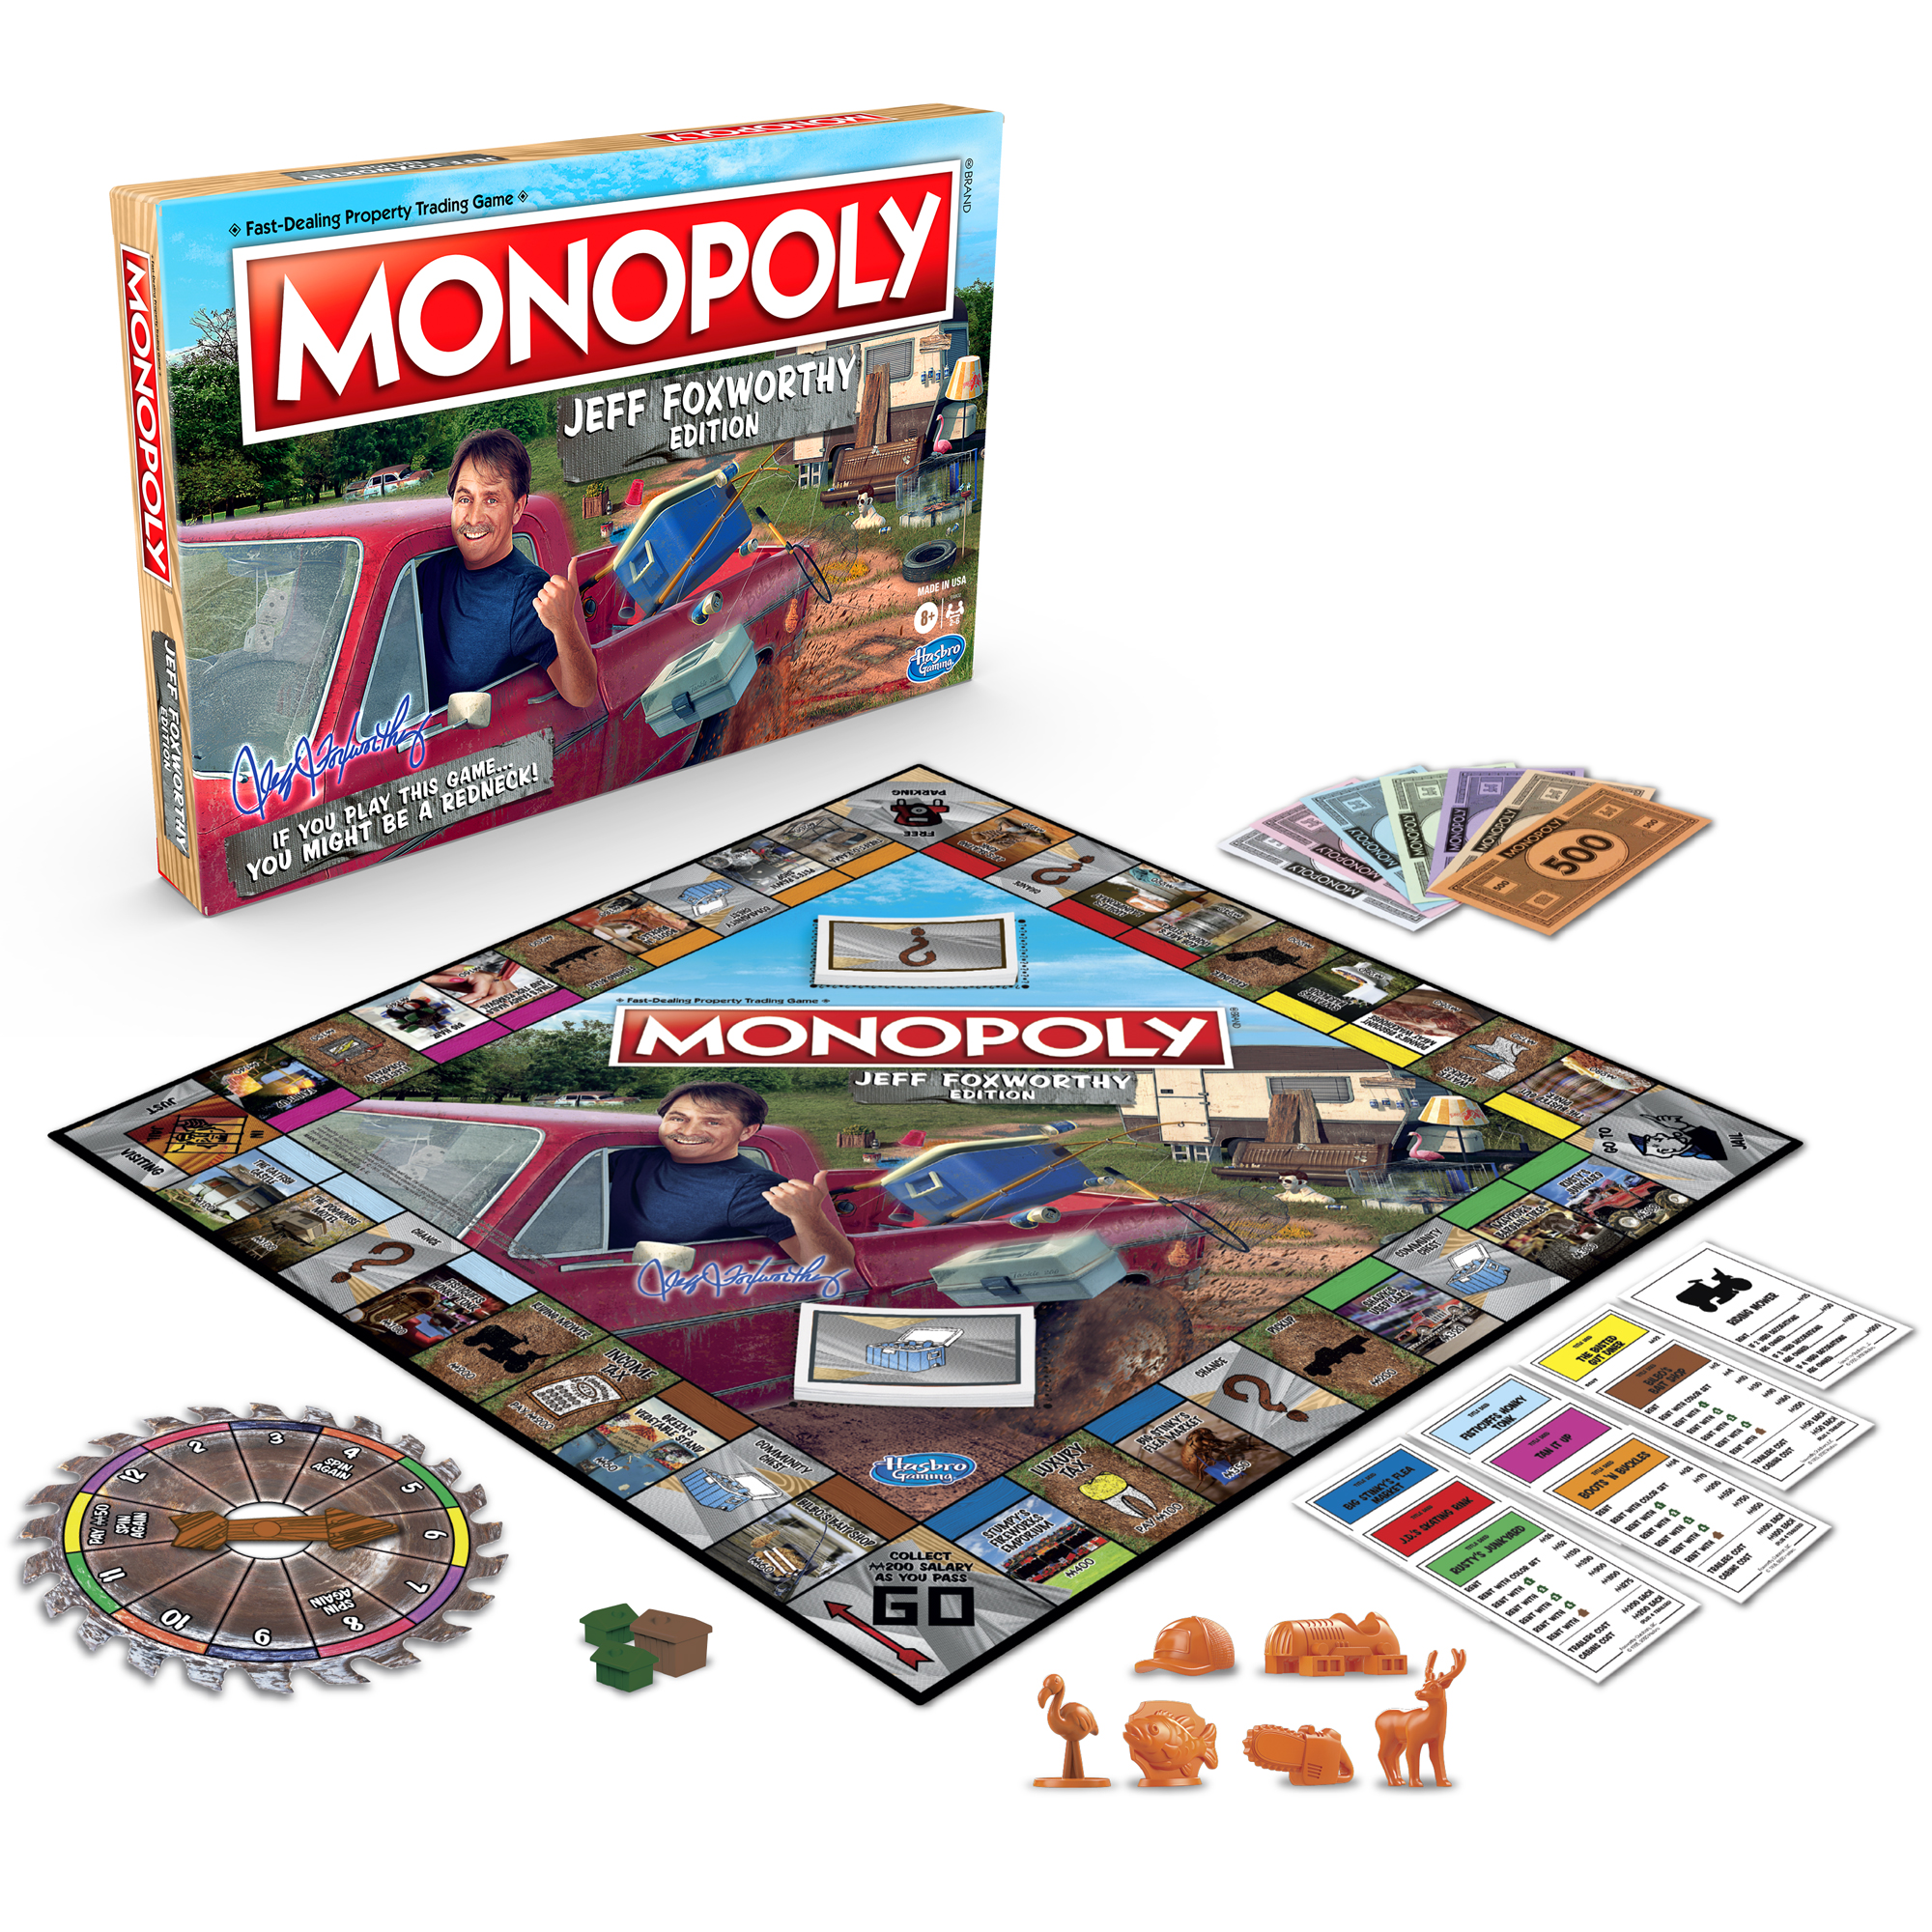 Monopoly Jeff Foxworthy Edition Board Game for Kids and Family Ages 8 and Up, 2-6 Players - image 4 of 6